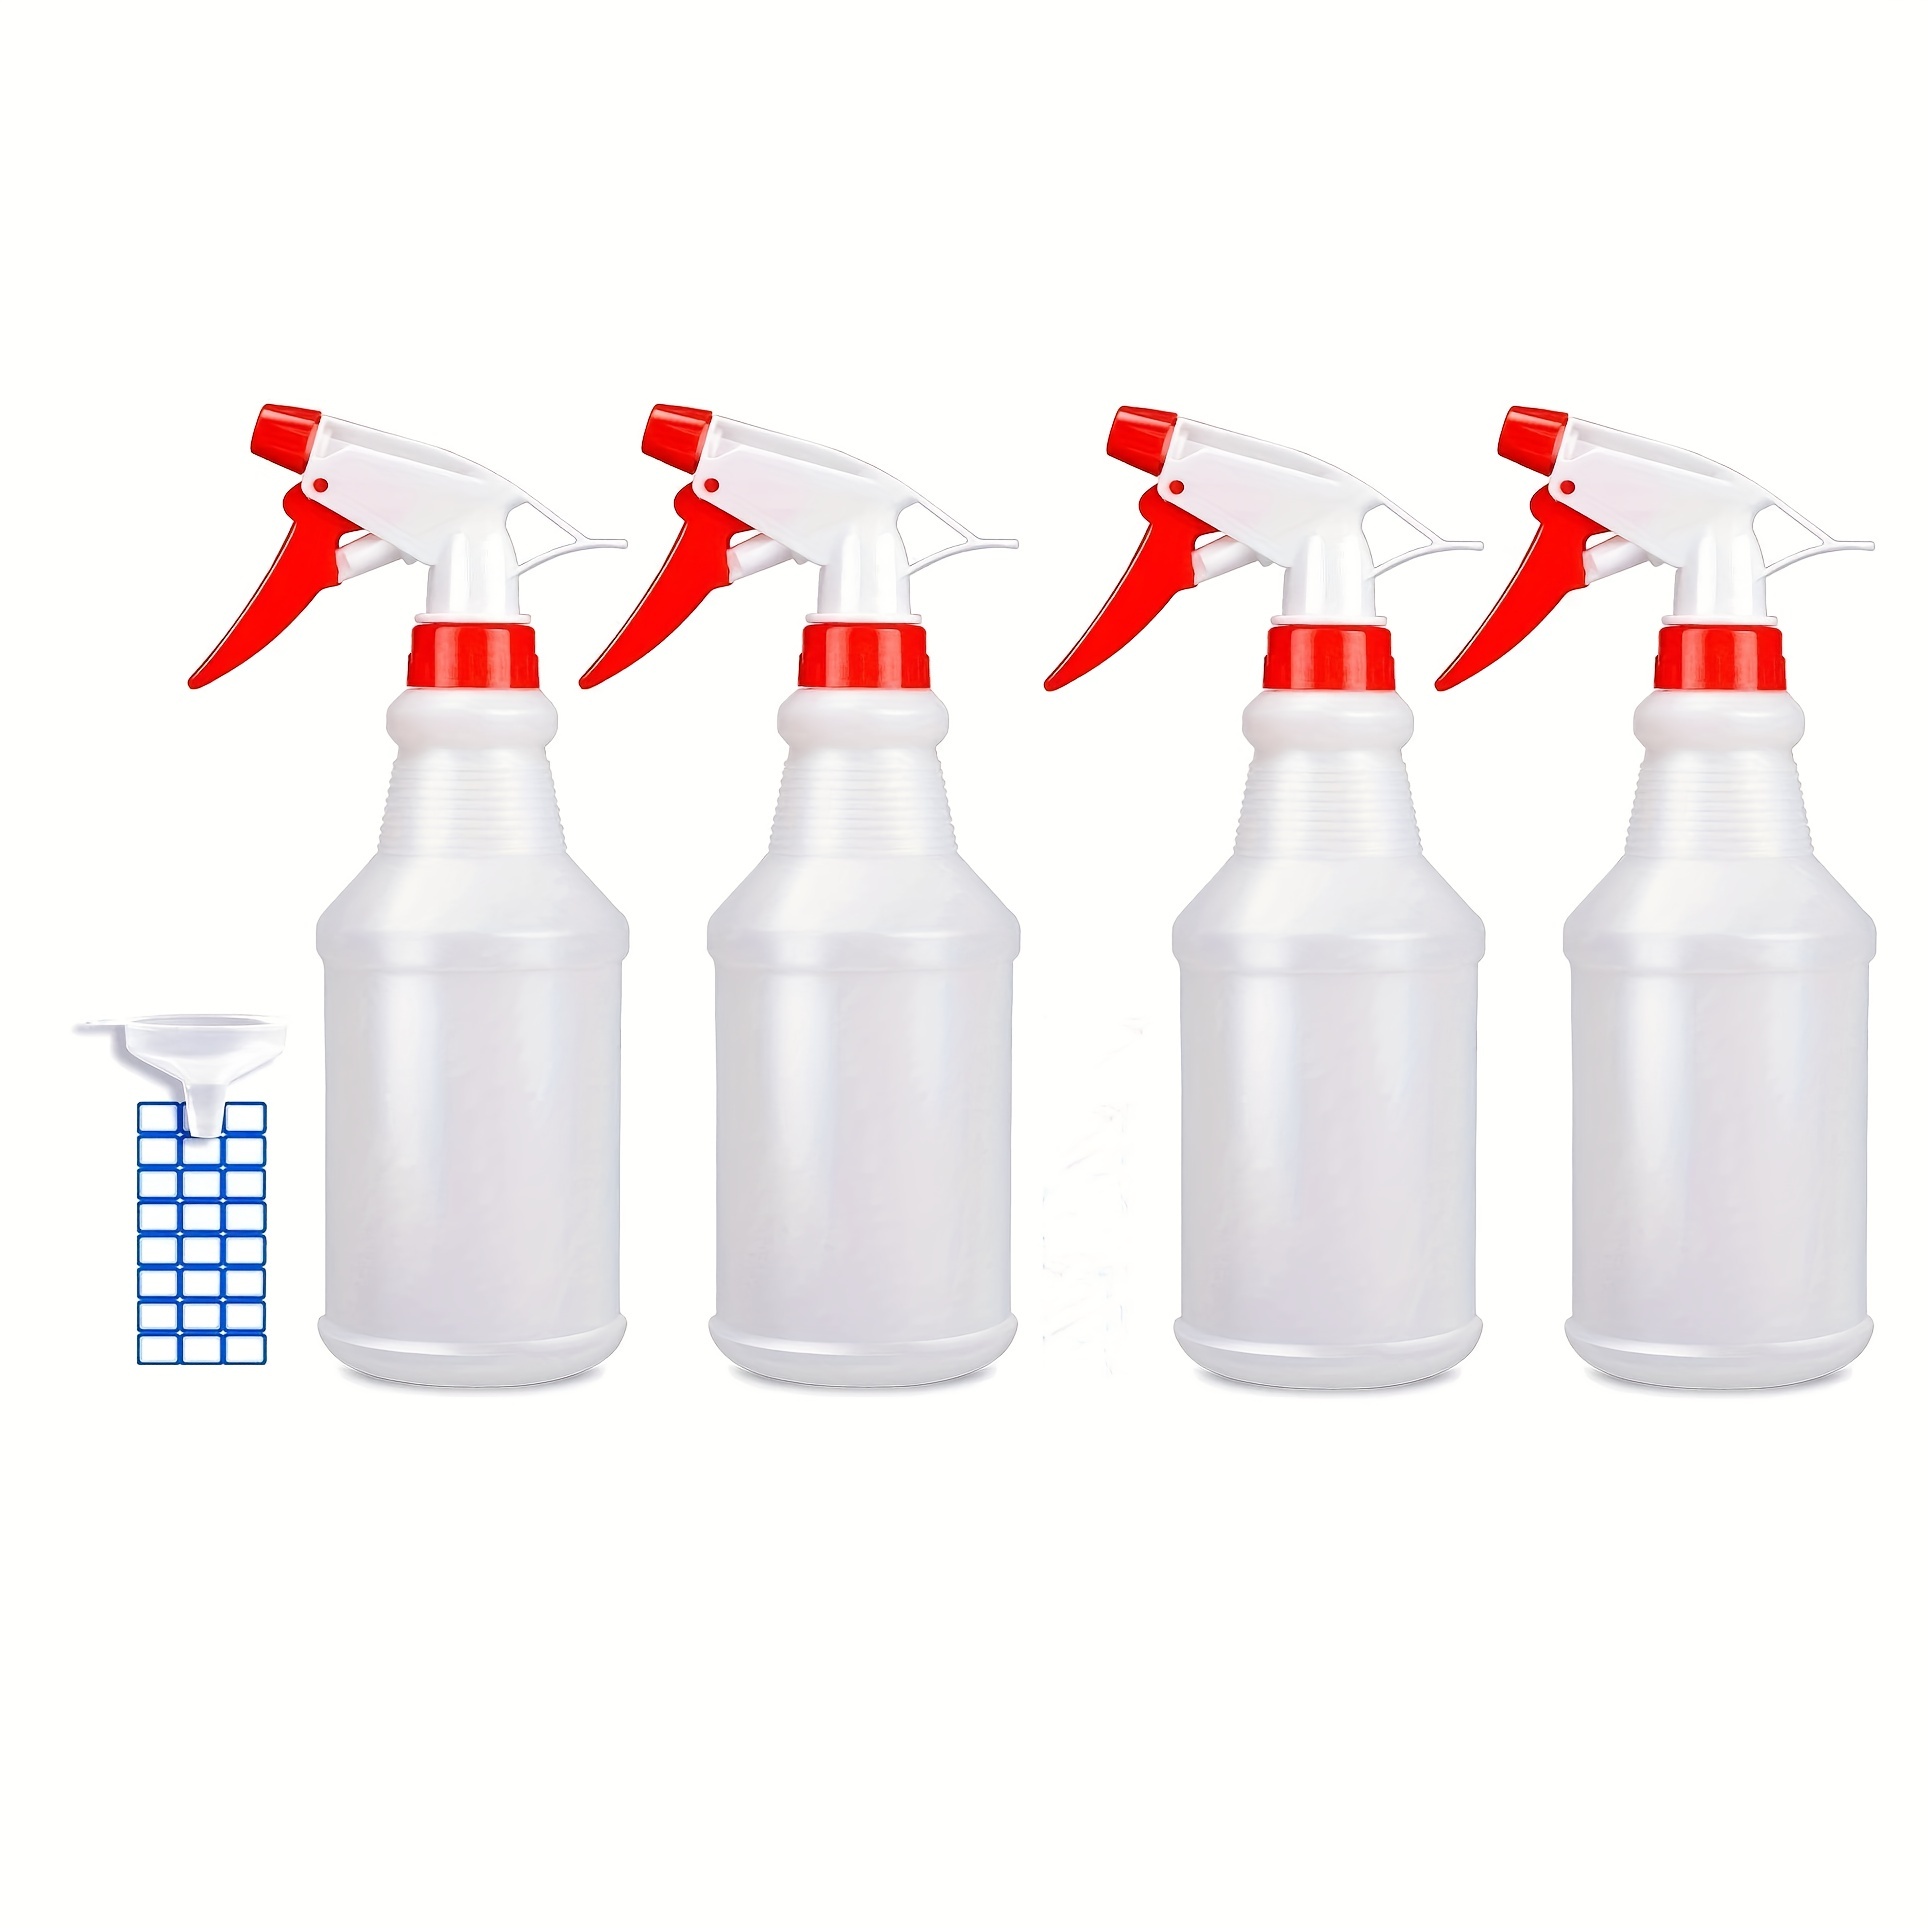 Johnbee Spray Bottle - Empty Spray Bottles (16oz/2Pack) - Spray Bottles for Cleaning Solutions / Plants / Bleach Spray / BBQ - with Adjustable Nozzle